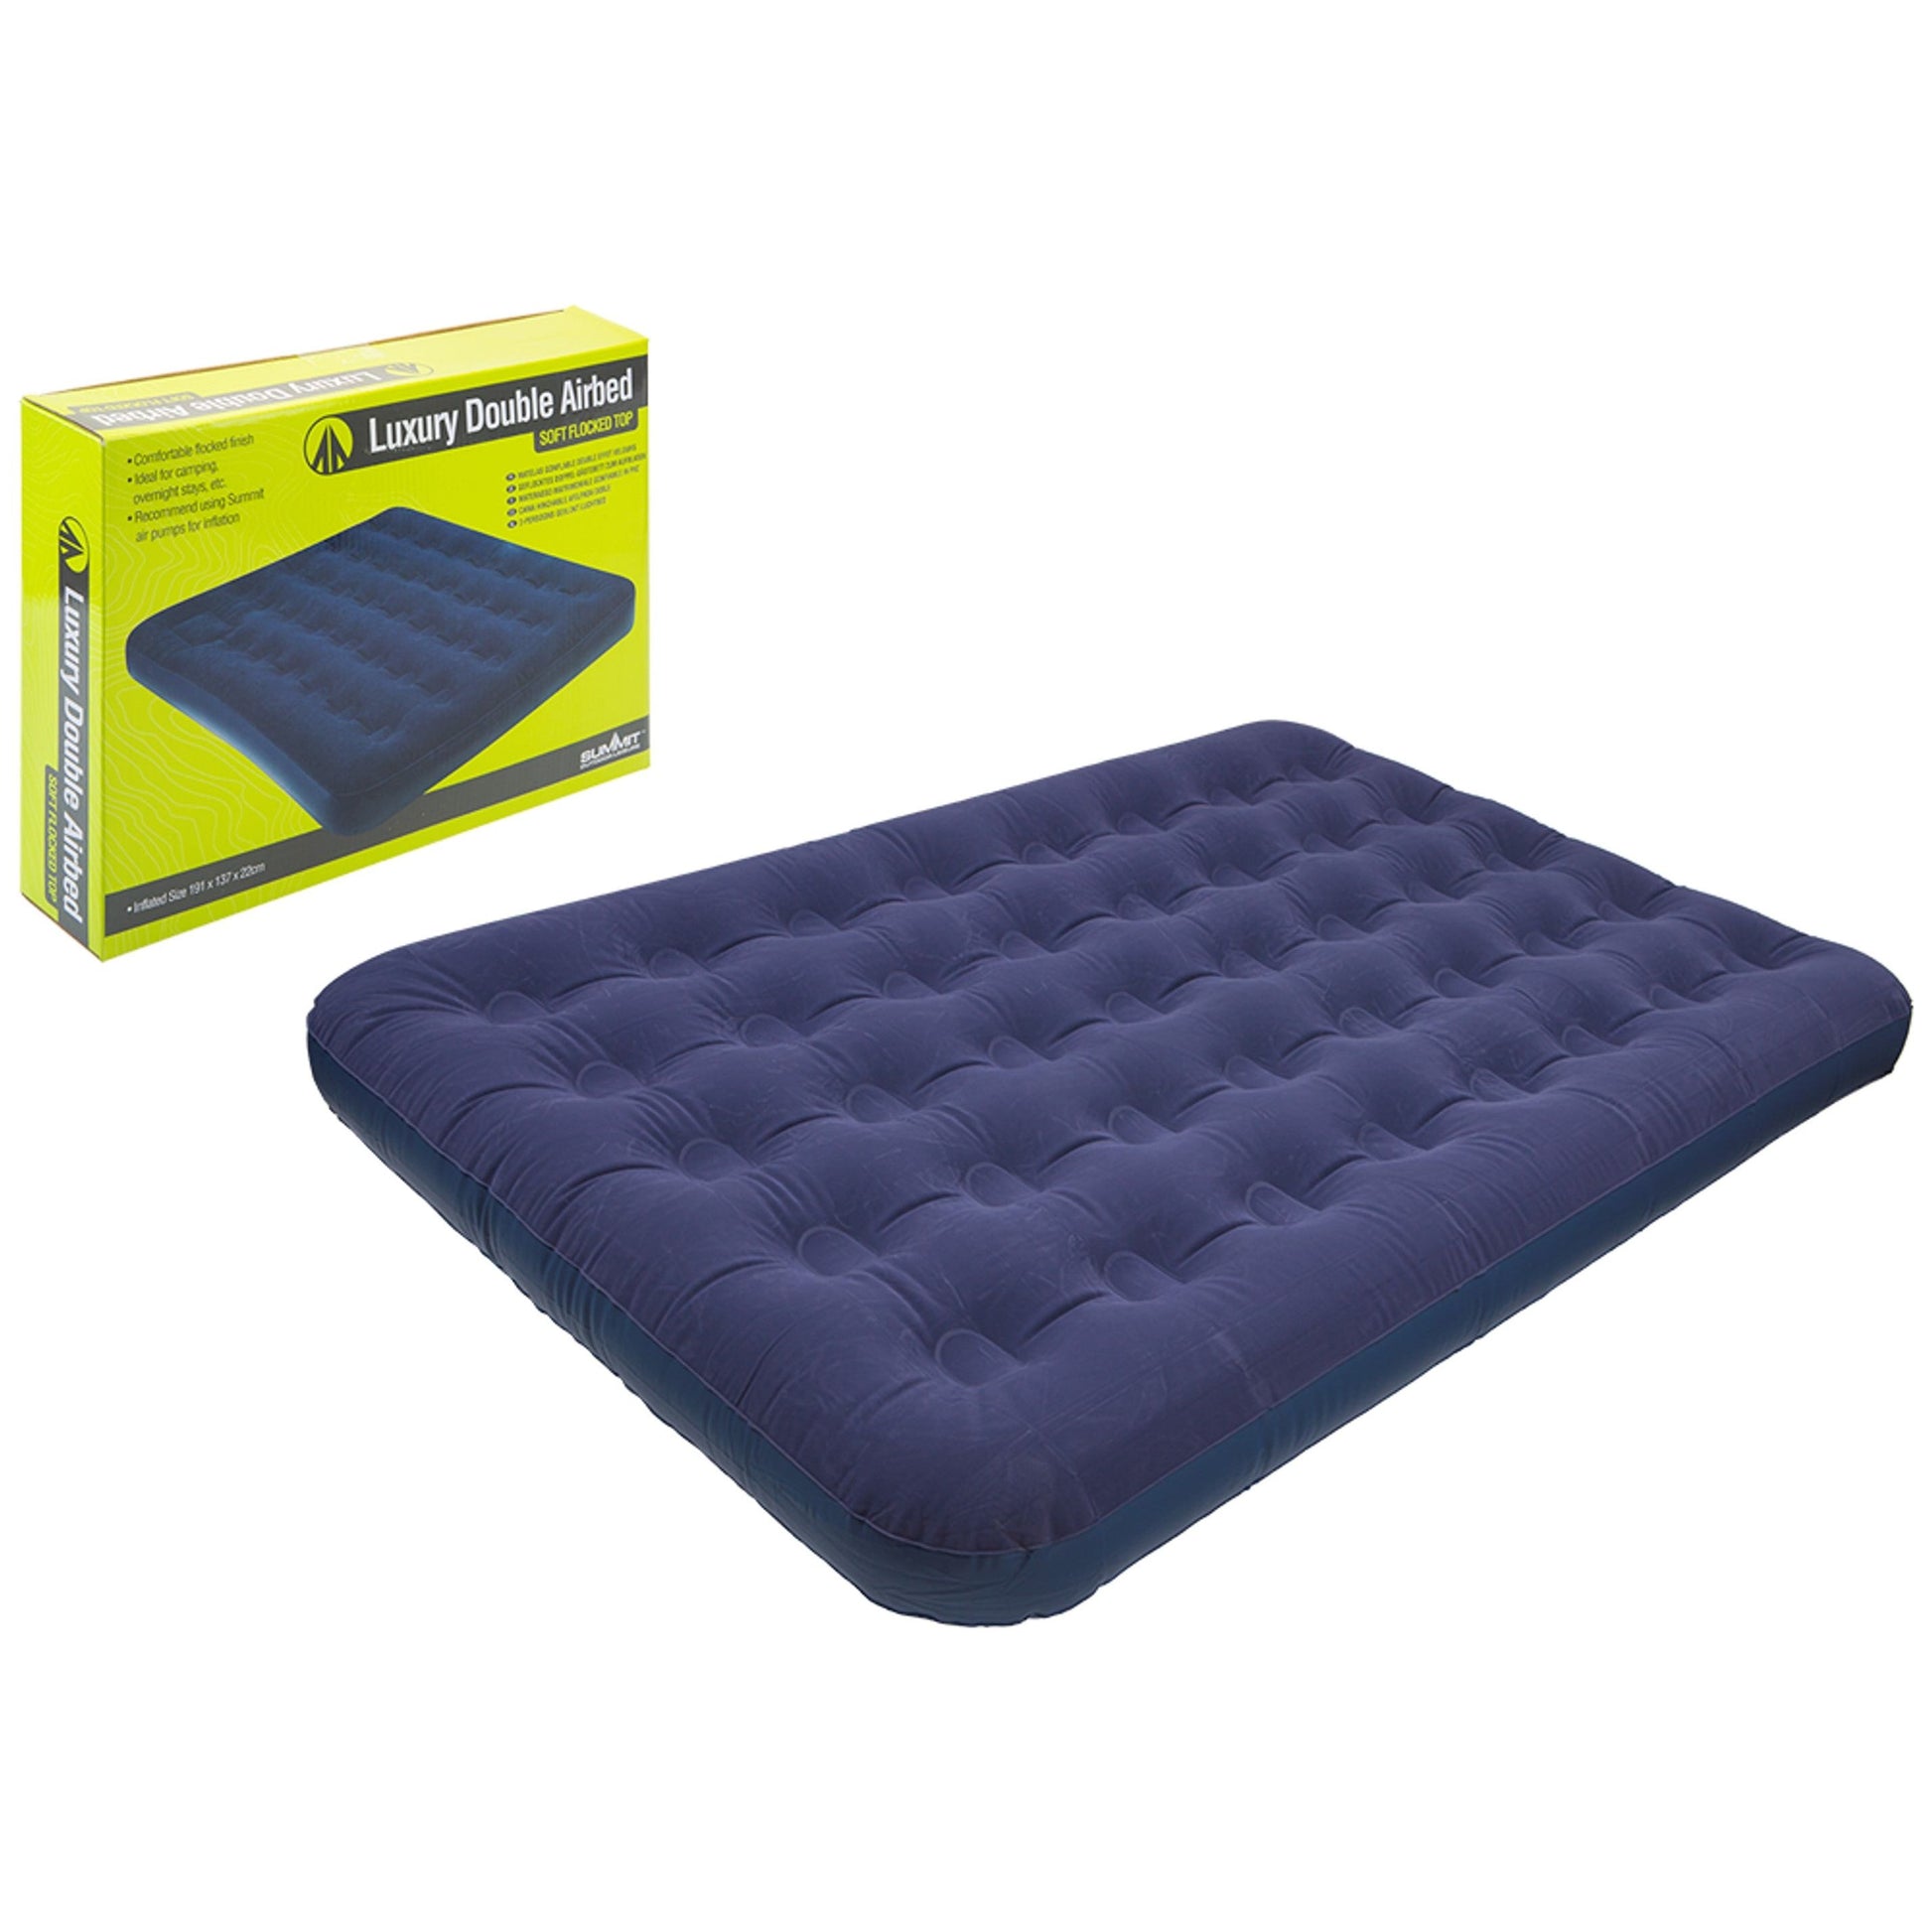 SUMMIT Double Flocked Airbed